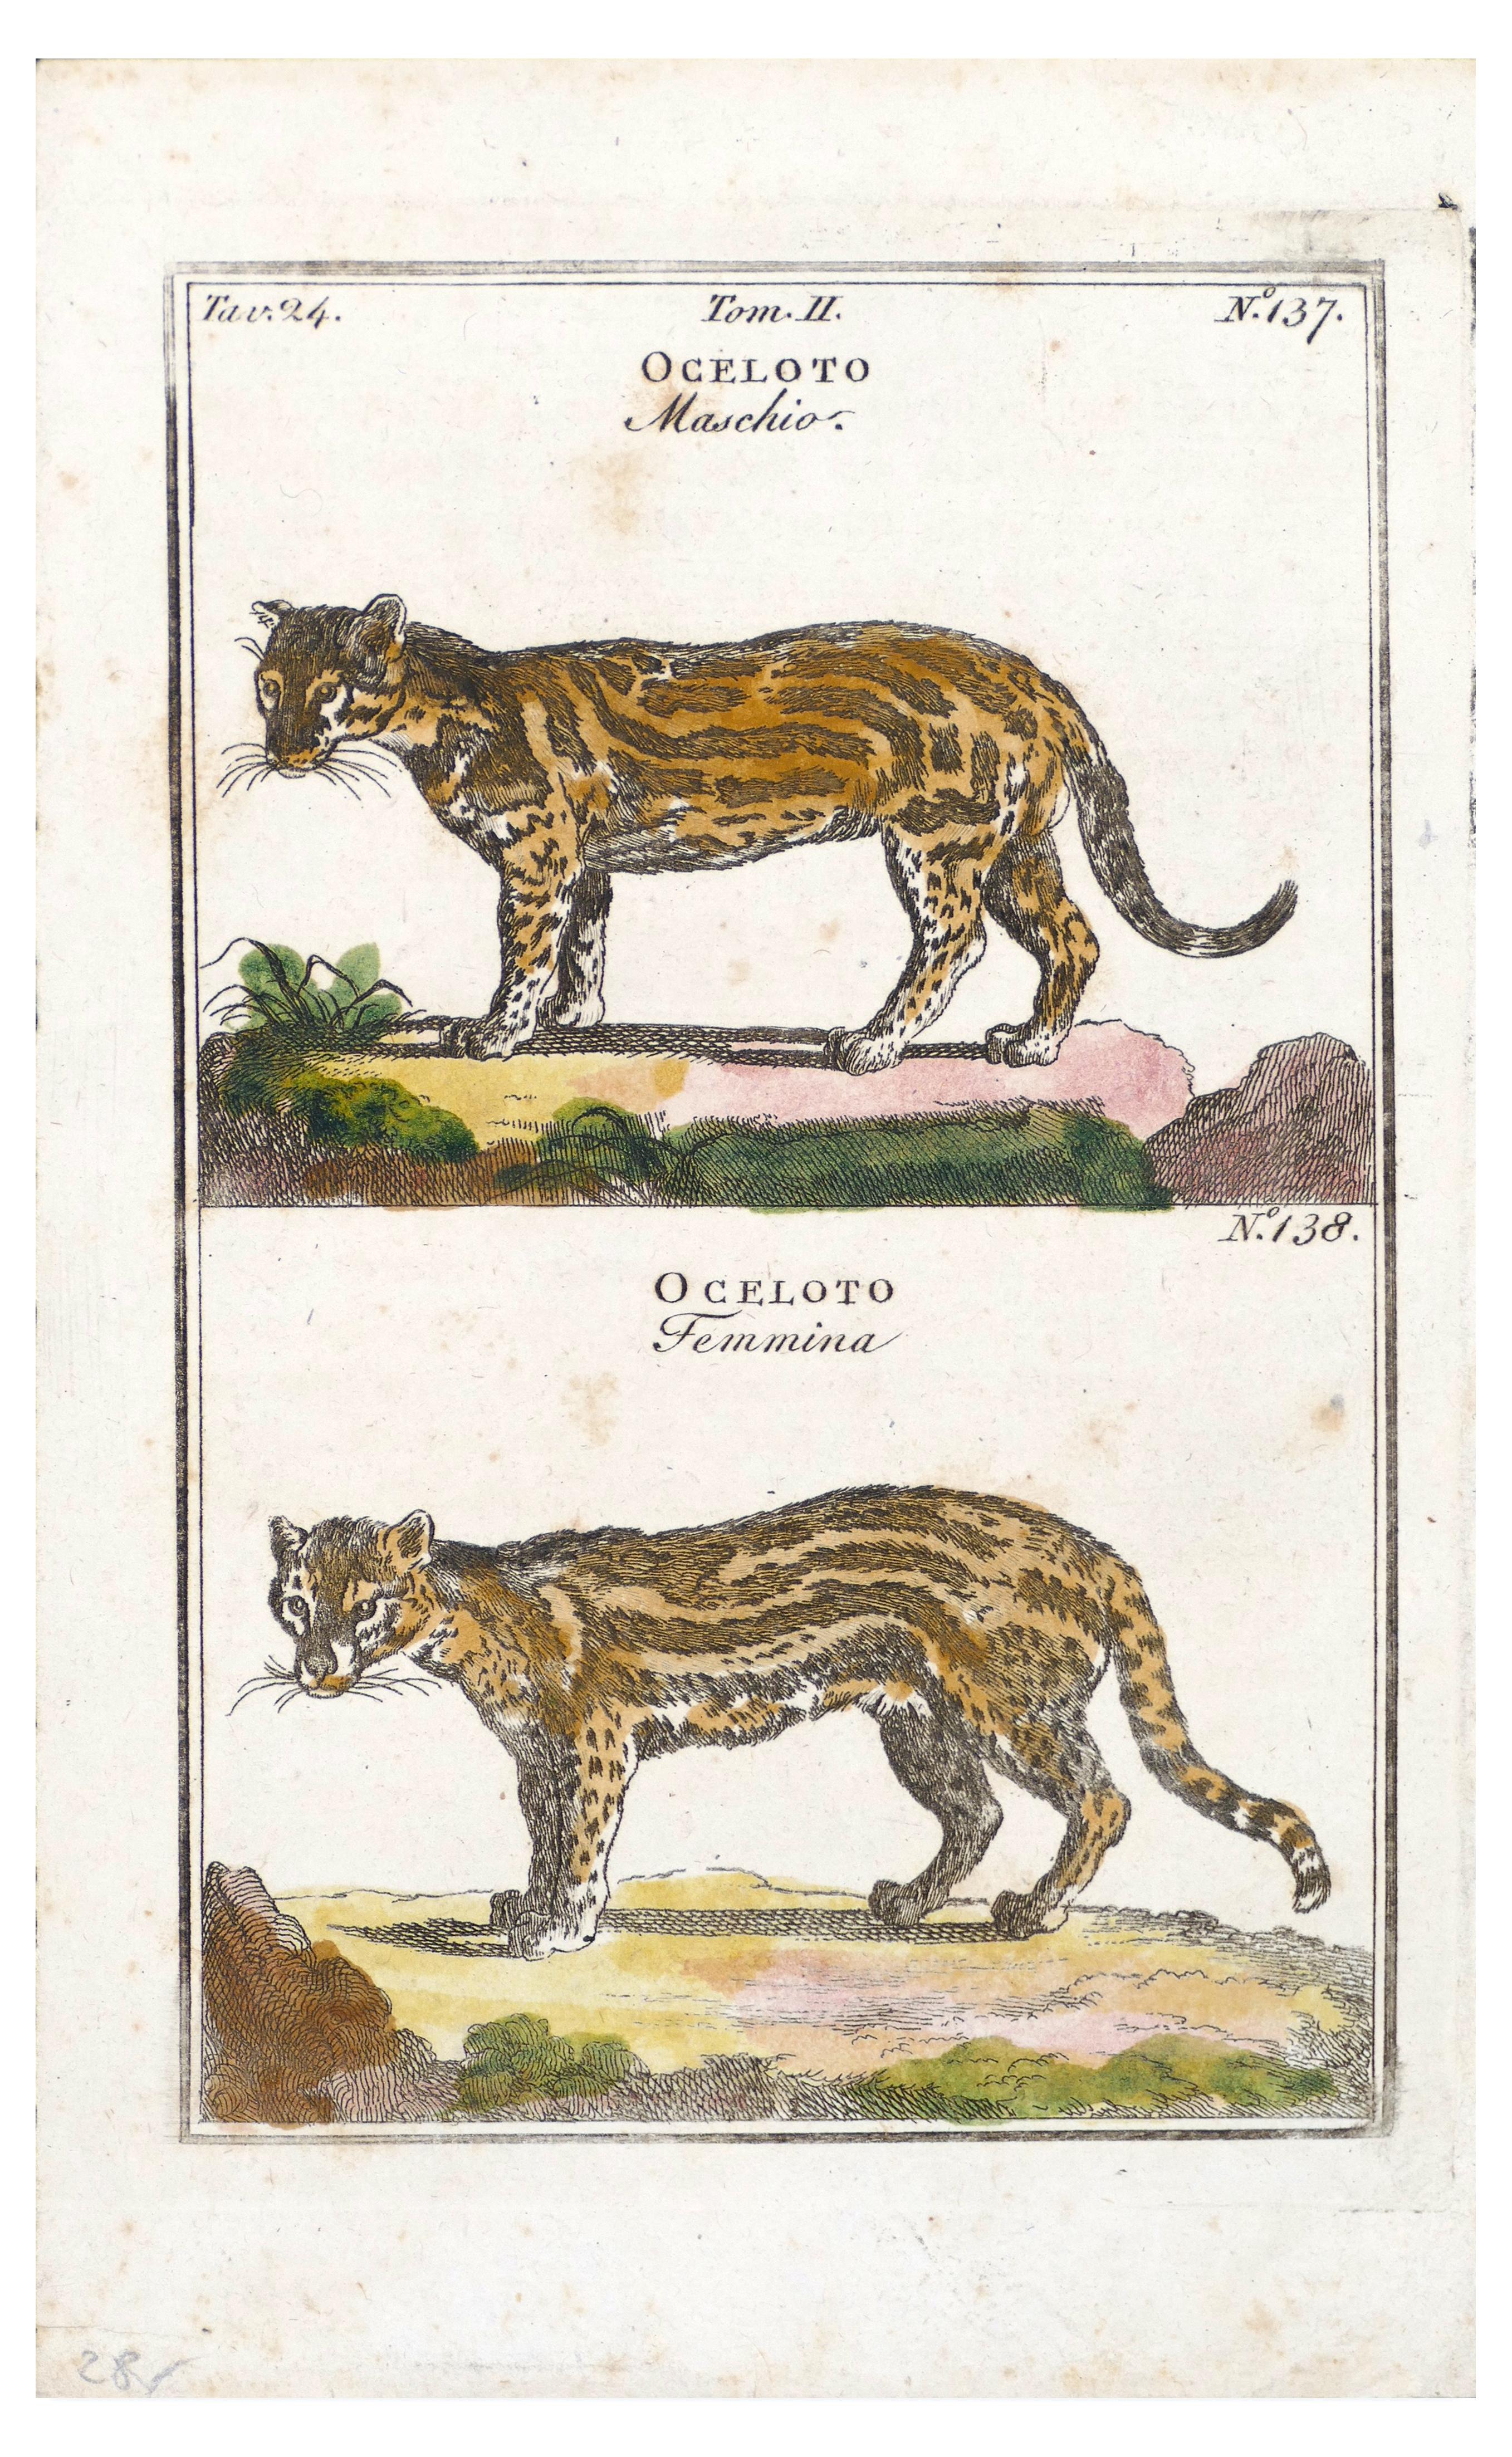 Unknown Figurative Print - Couple of Wild Cats - Original Etching - 17th Century